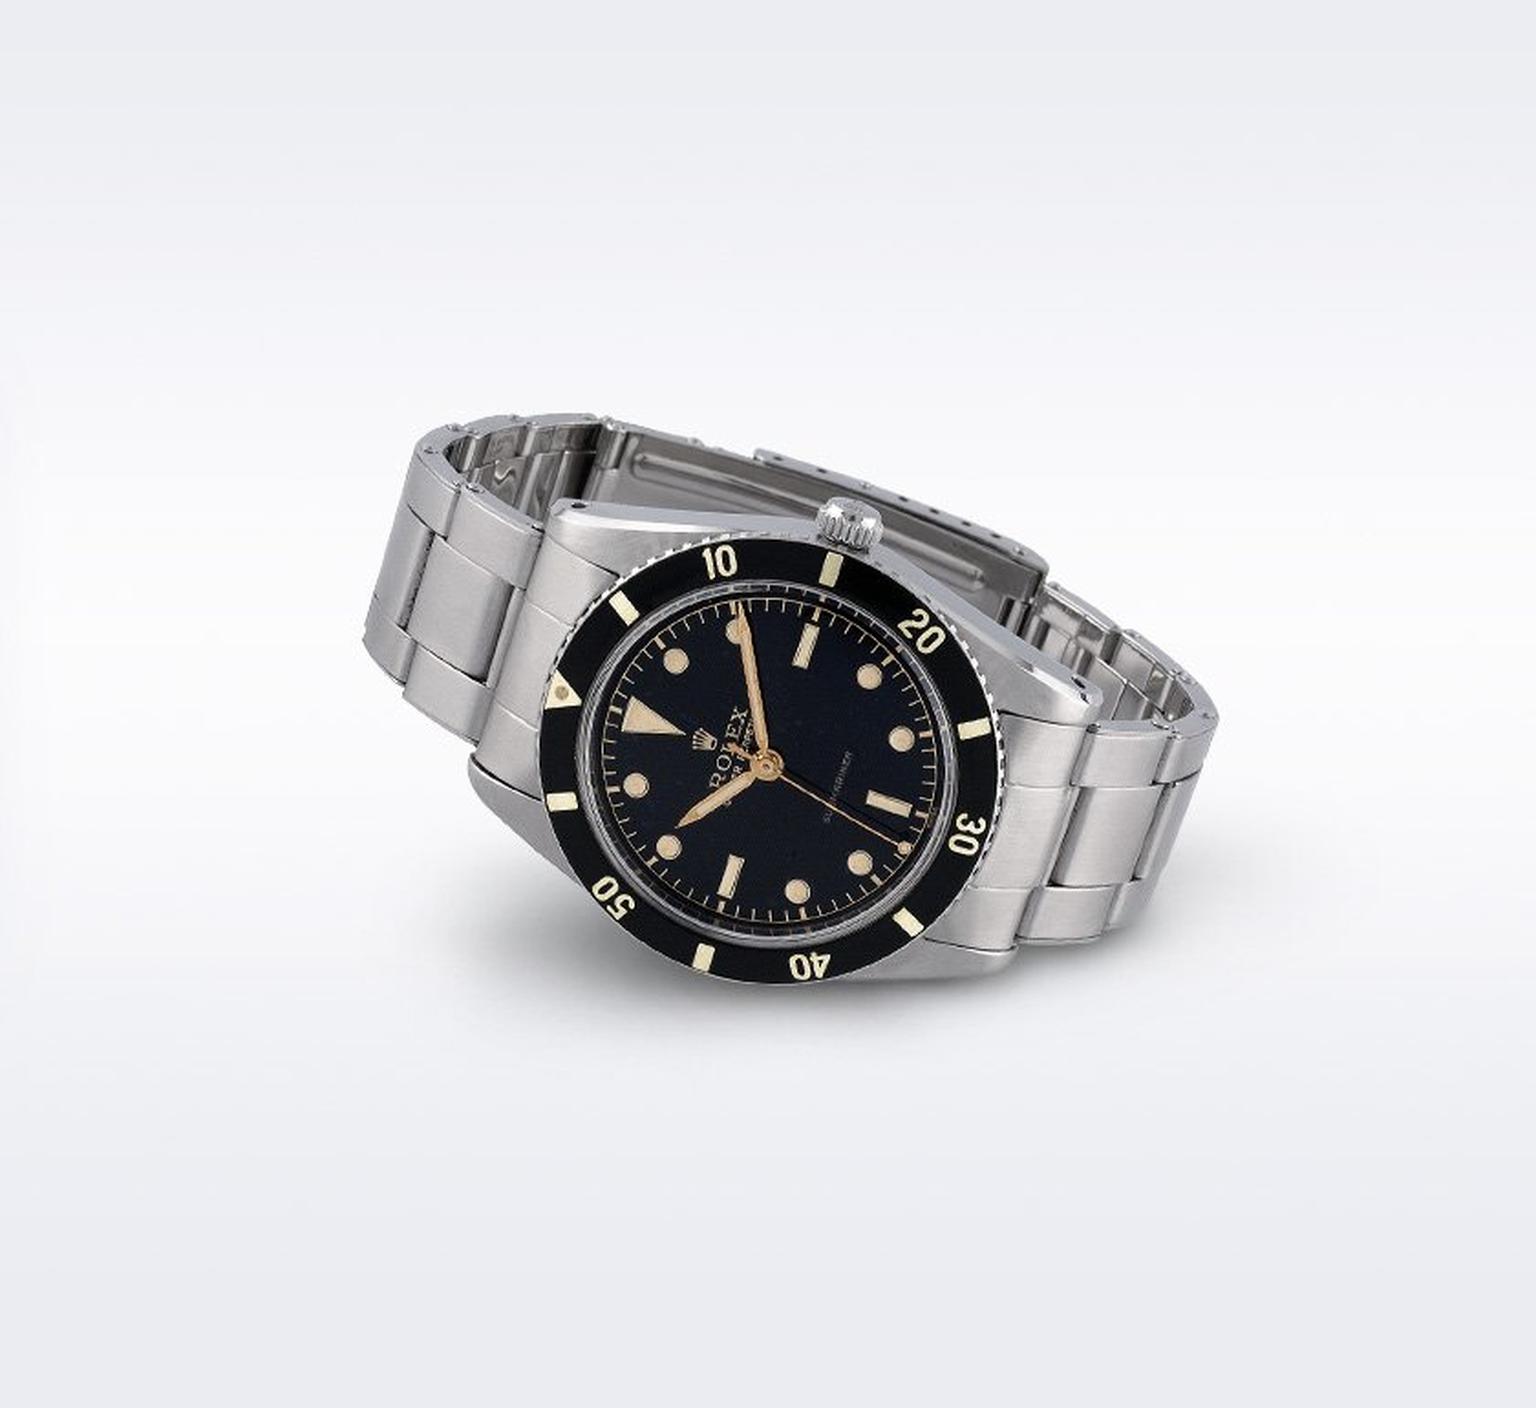 The Rolex Submariner was the first diver watch capable of withstanding depths of 100 metres and the official watch of the Royal Navy.